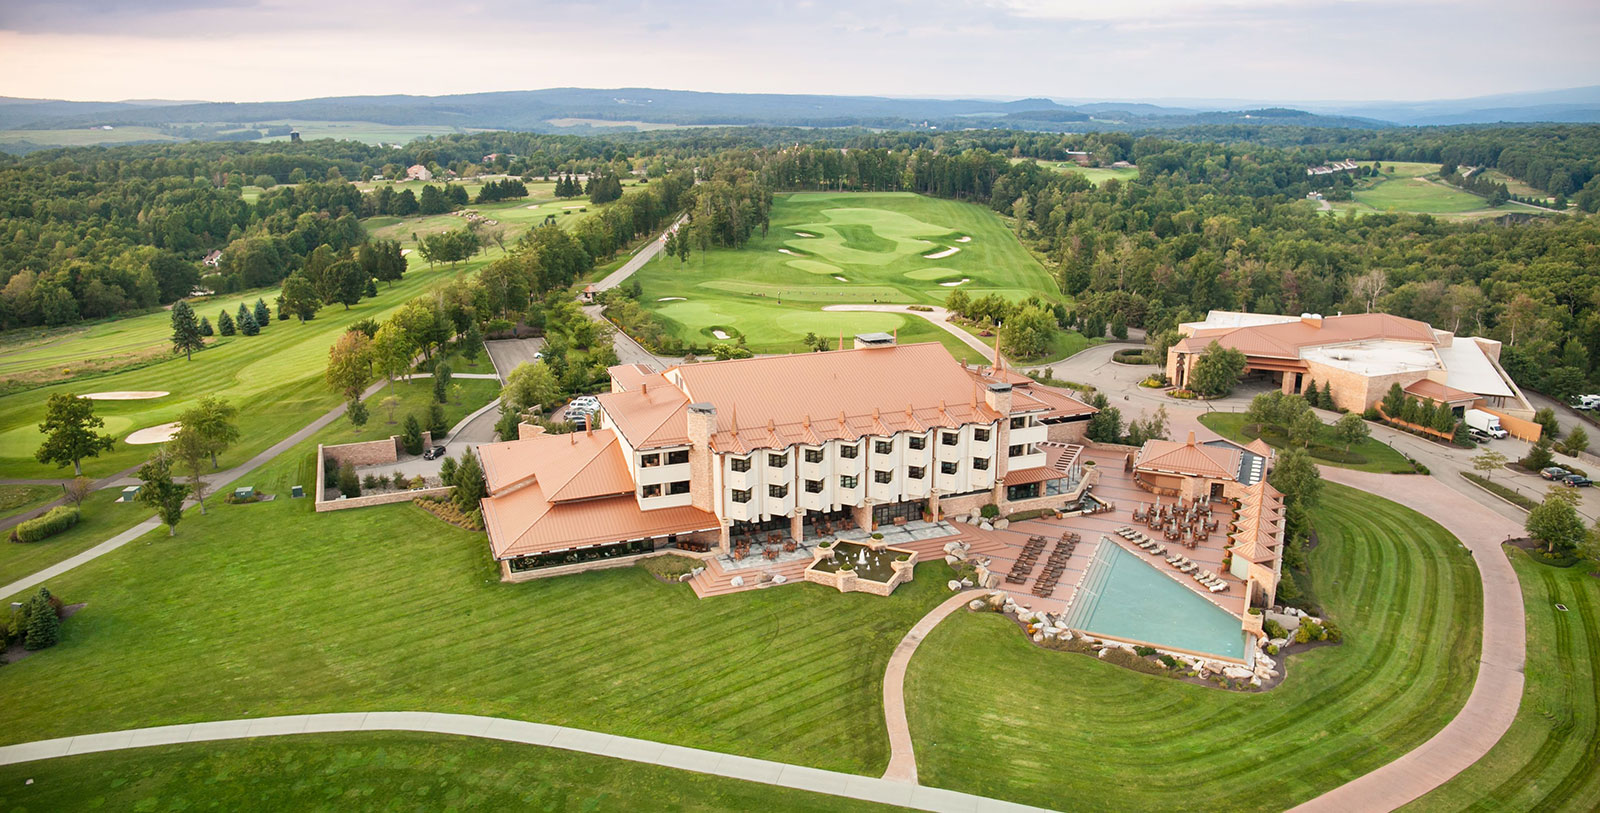 Explore Nemacolin's 2,200 acre property and learn about all the animals with the hotel's wildlife expert.